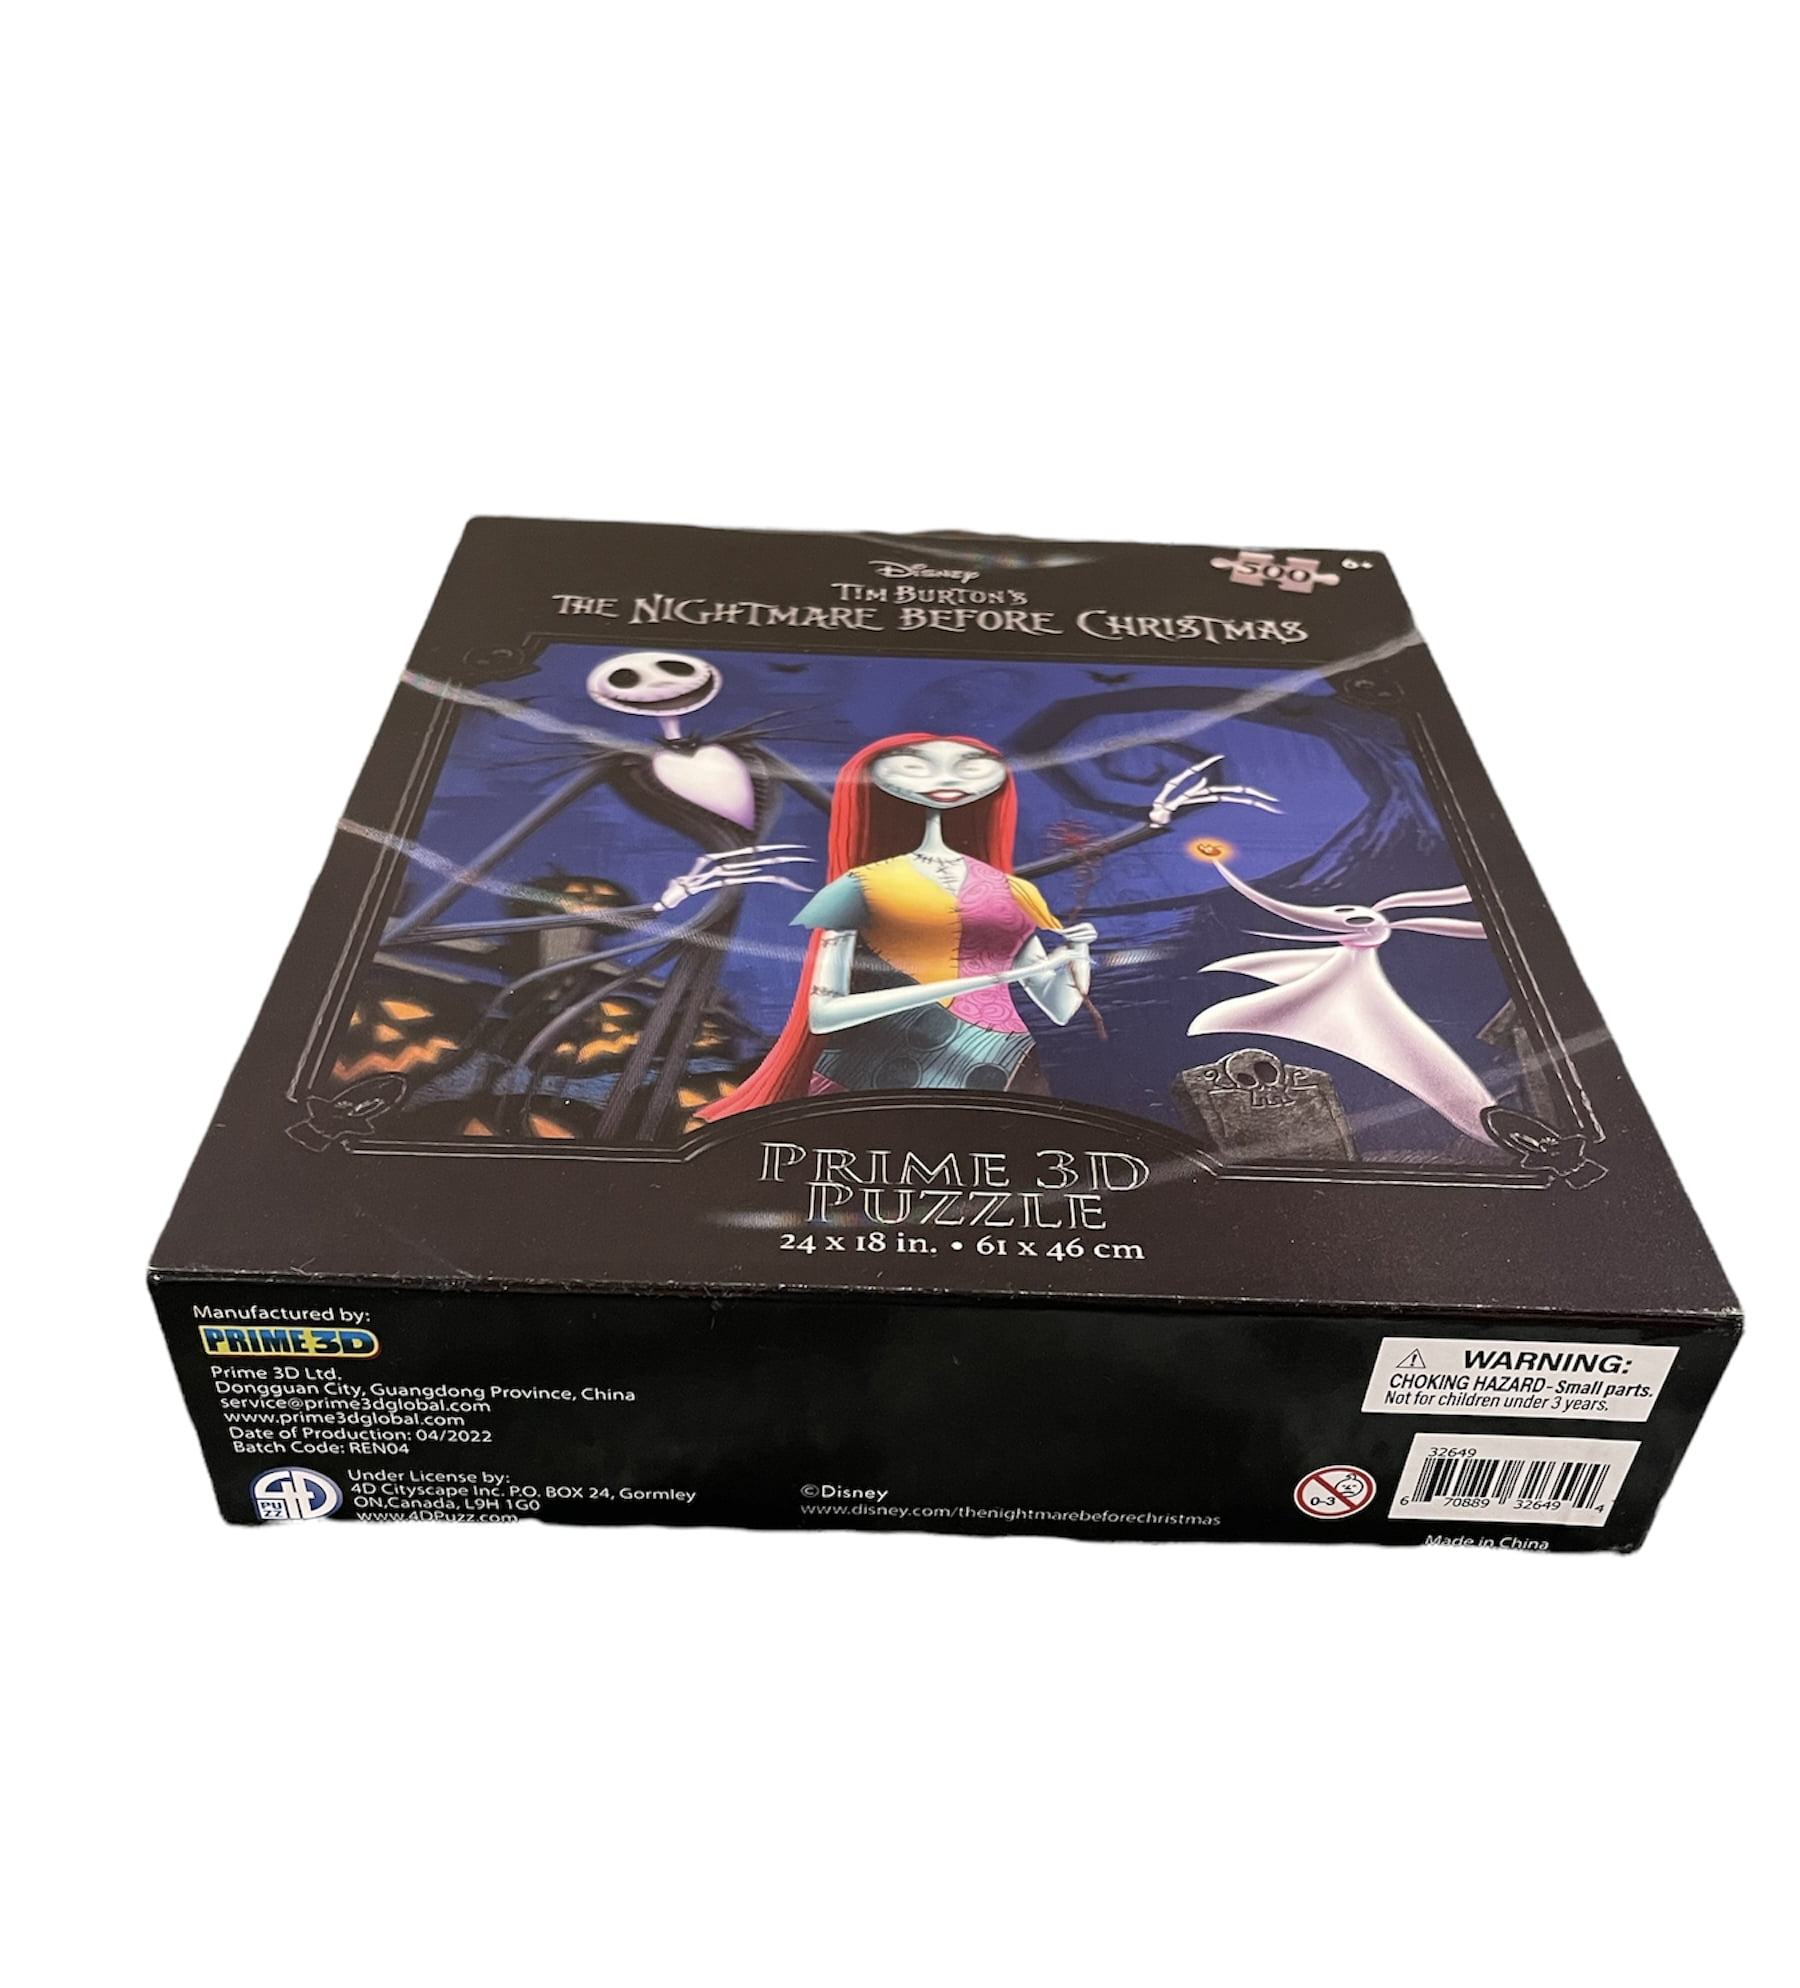 DLR - The Nightmare Before Christmas 1000 Pcs Puzzle — USShoppingSOS